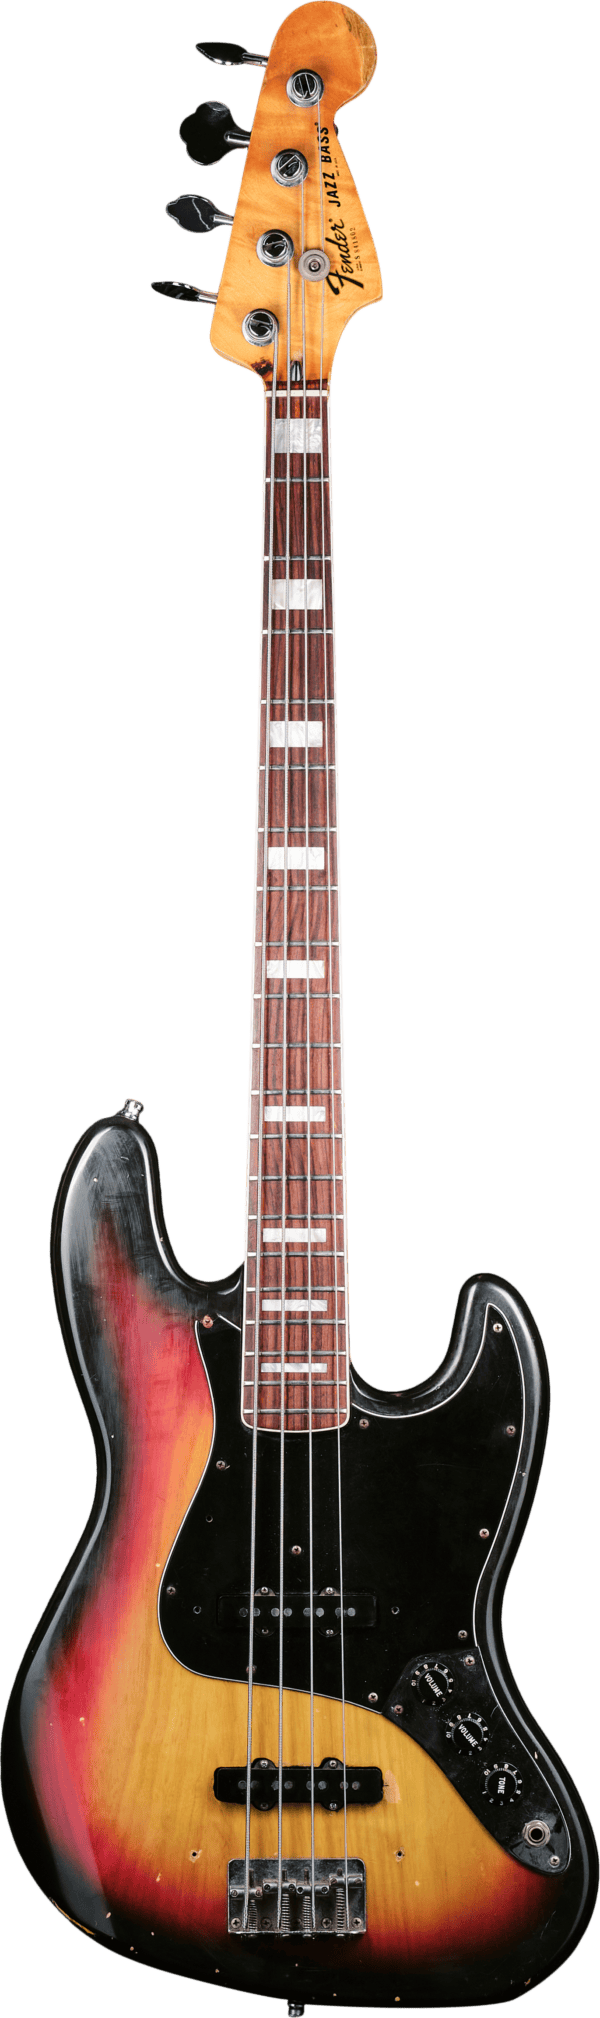 Pre-owned Fender Jazz bass 1978